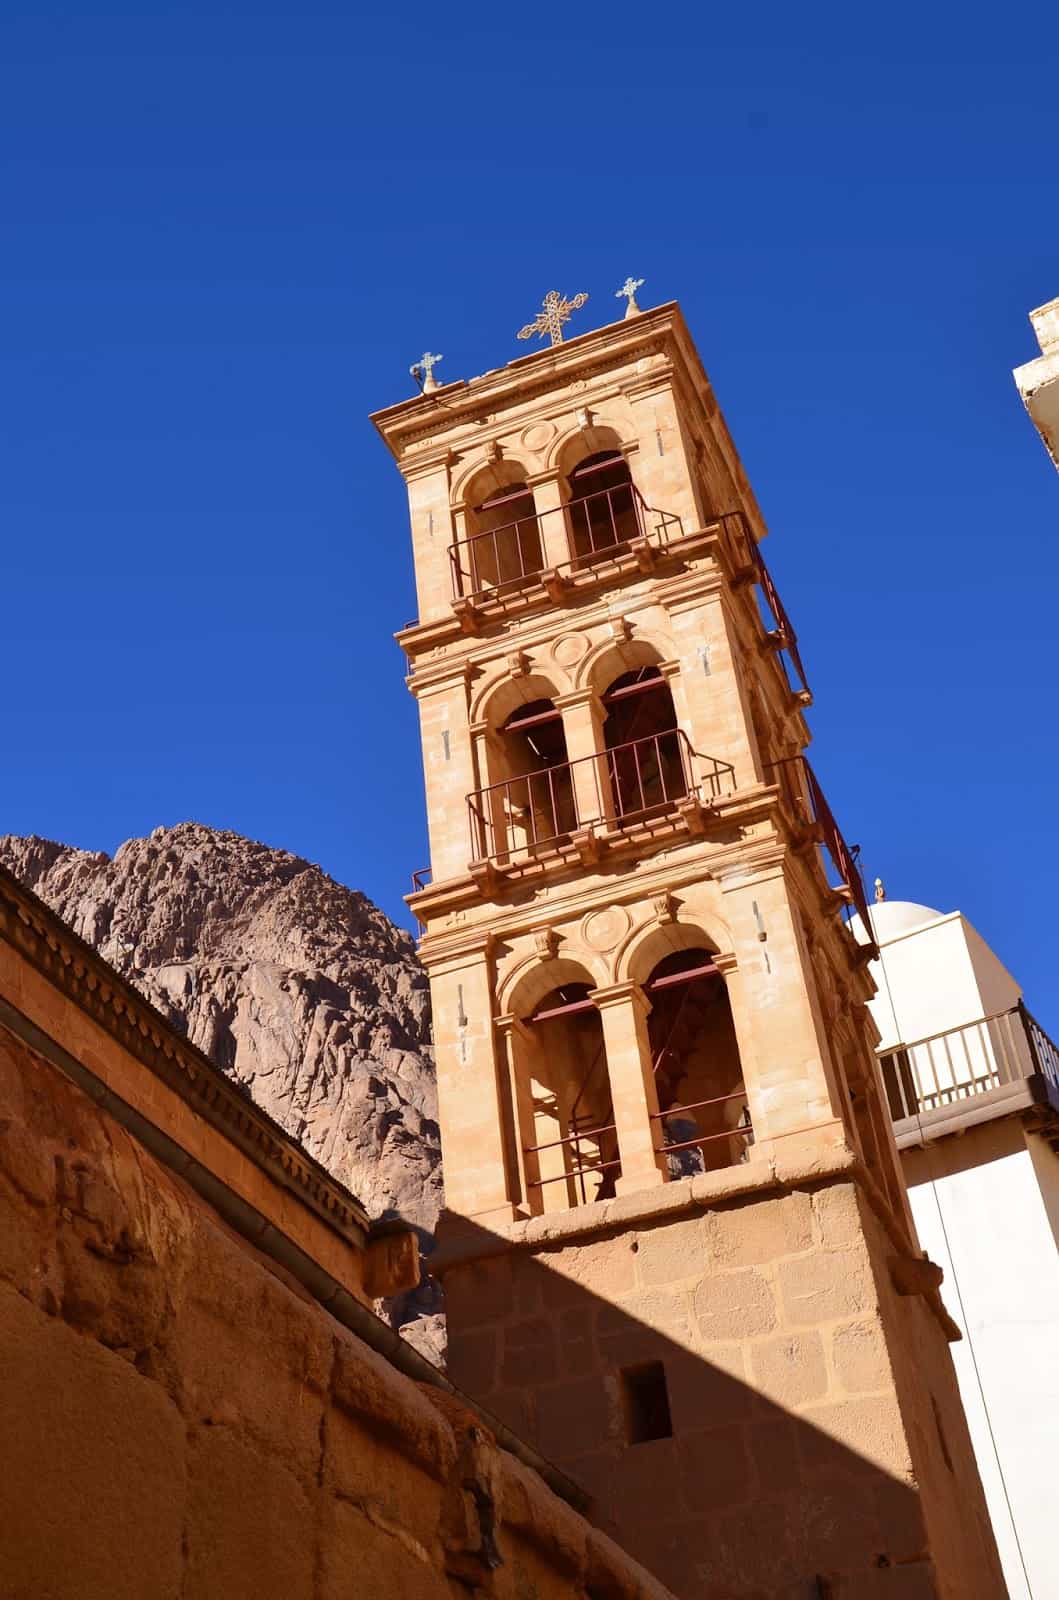 Bell tower at Saint Catherine’s Monastery in Sinai, Egypt